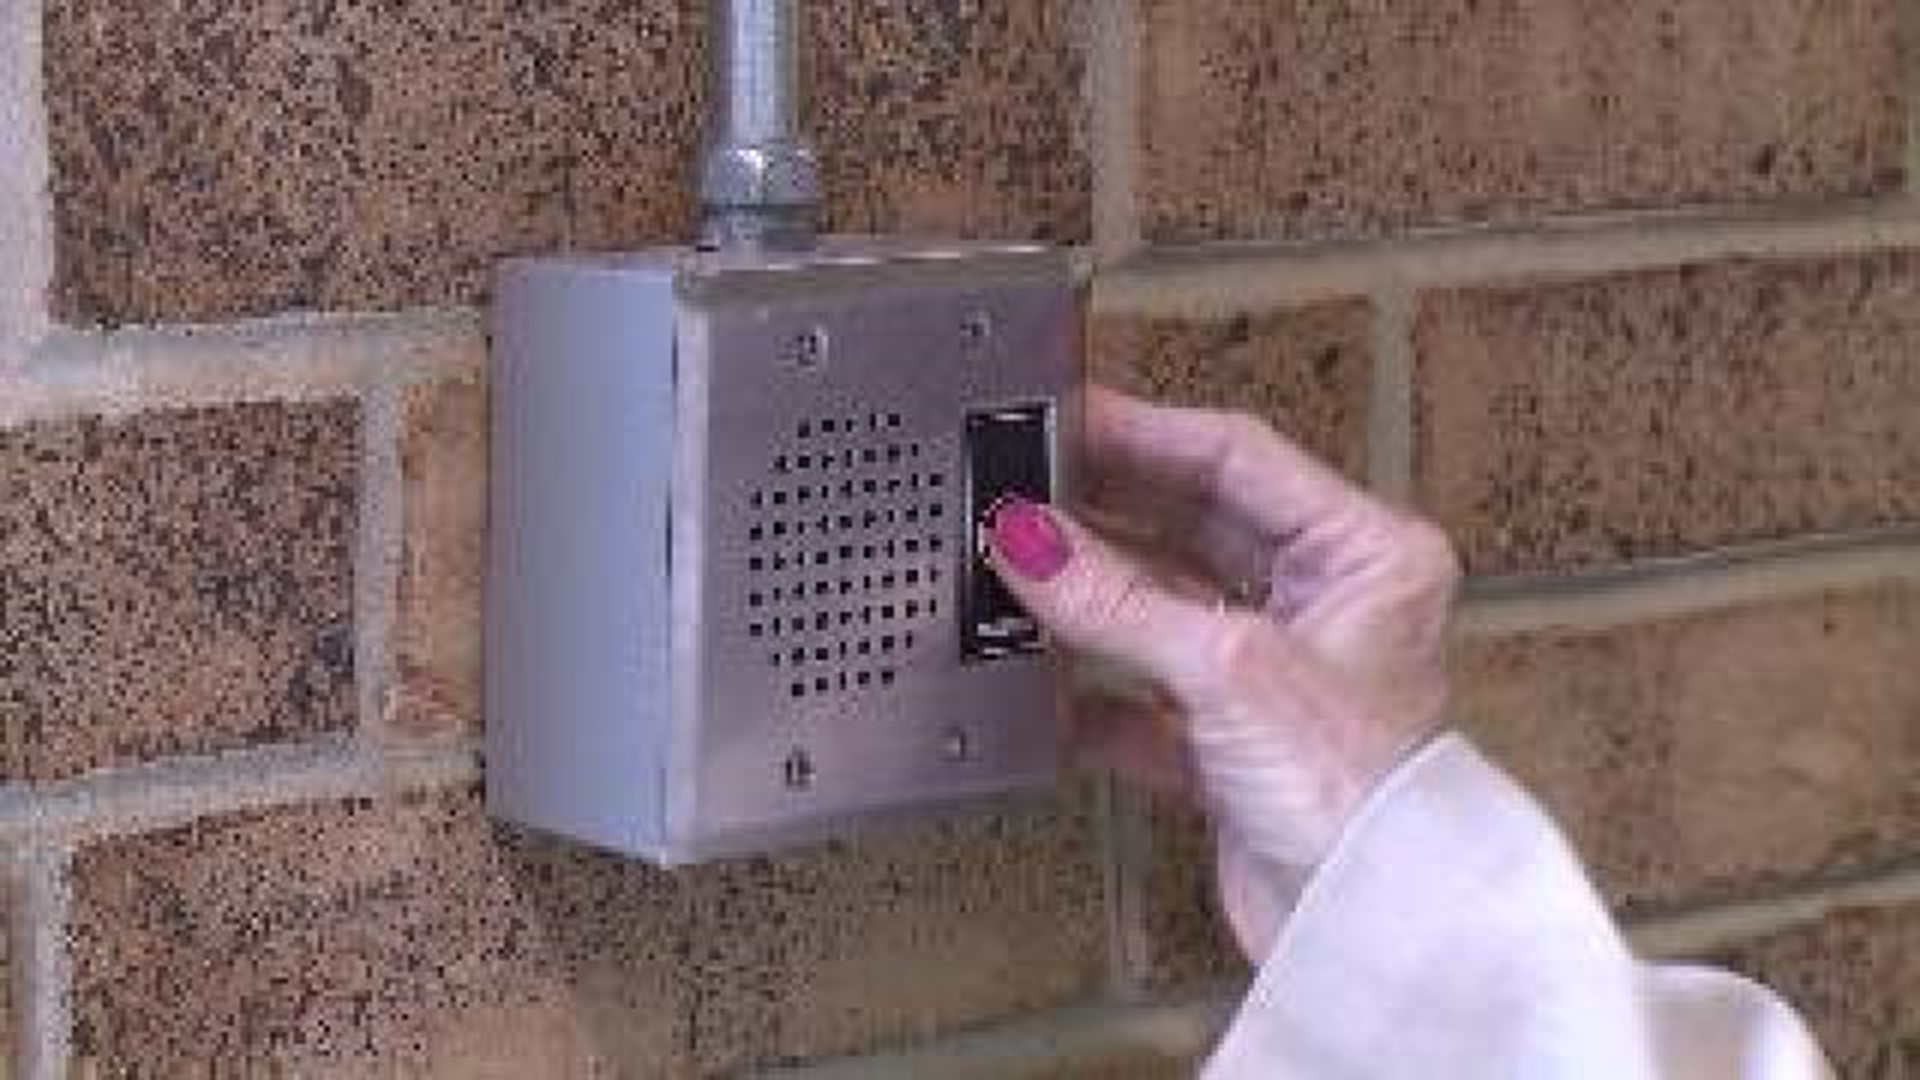 Security System Being Tested At Two Fort Smith Elementary Schools